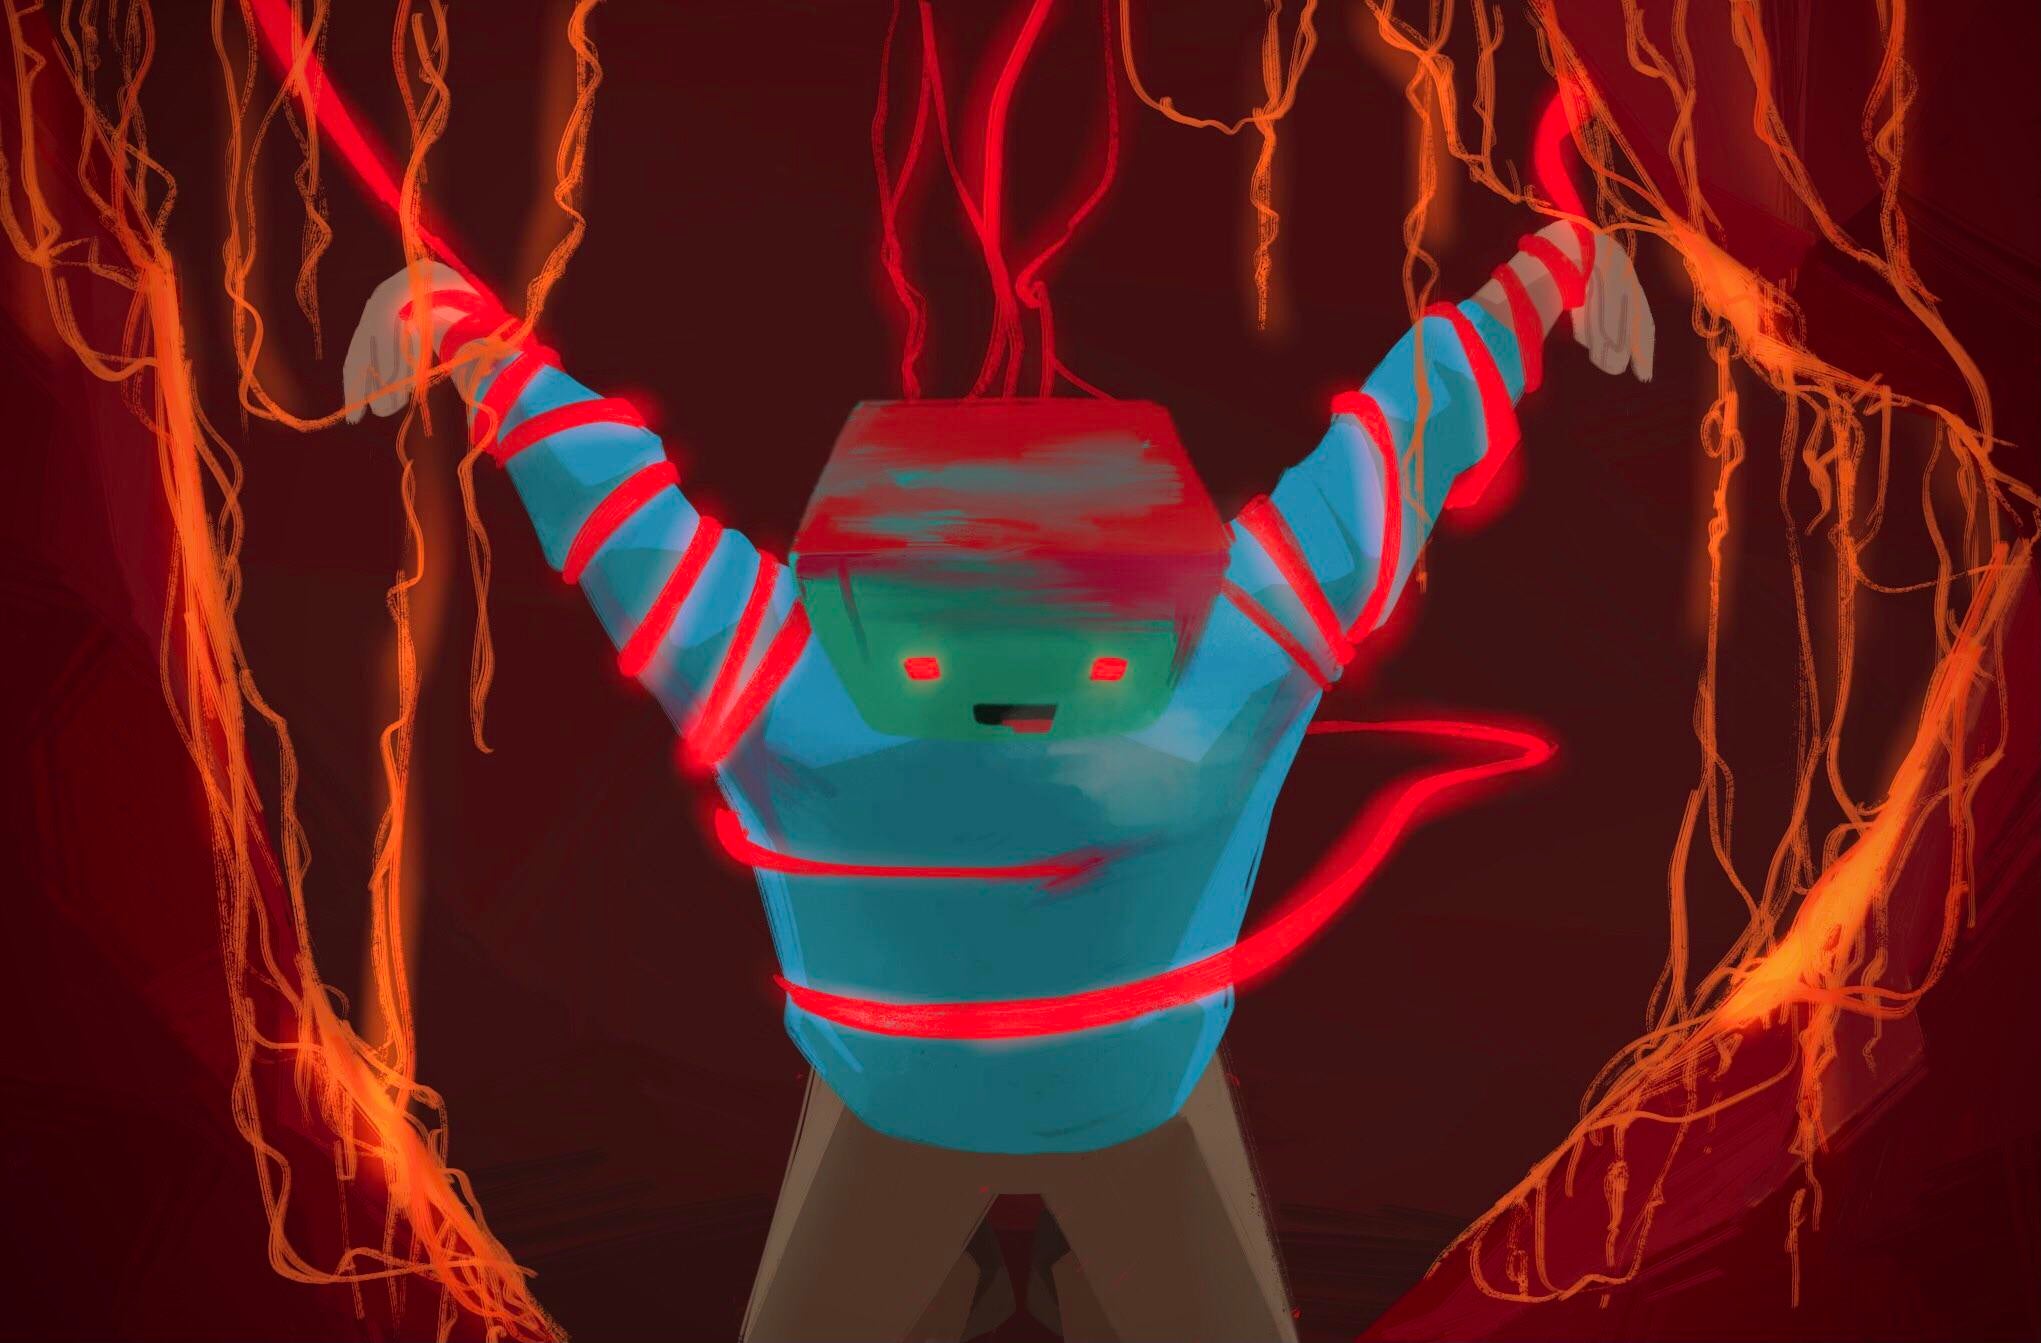 This is a drawing of Skeppy held inside the Egg. He's dressed in his blue sweatshirt and black pants and his head is a bright blue diamond cube. The Egg is holding Skeppy's arms above his head and forcing him down onto his knees. Red vines circle his arms and torso and rest on the top of his head. Skeppy's eyes have turned red. The inside of the Egg is red and stringy, looking like a pumpkin.